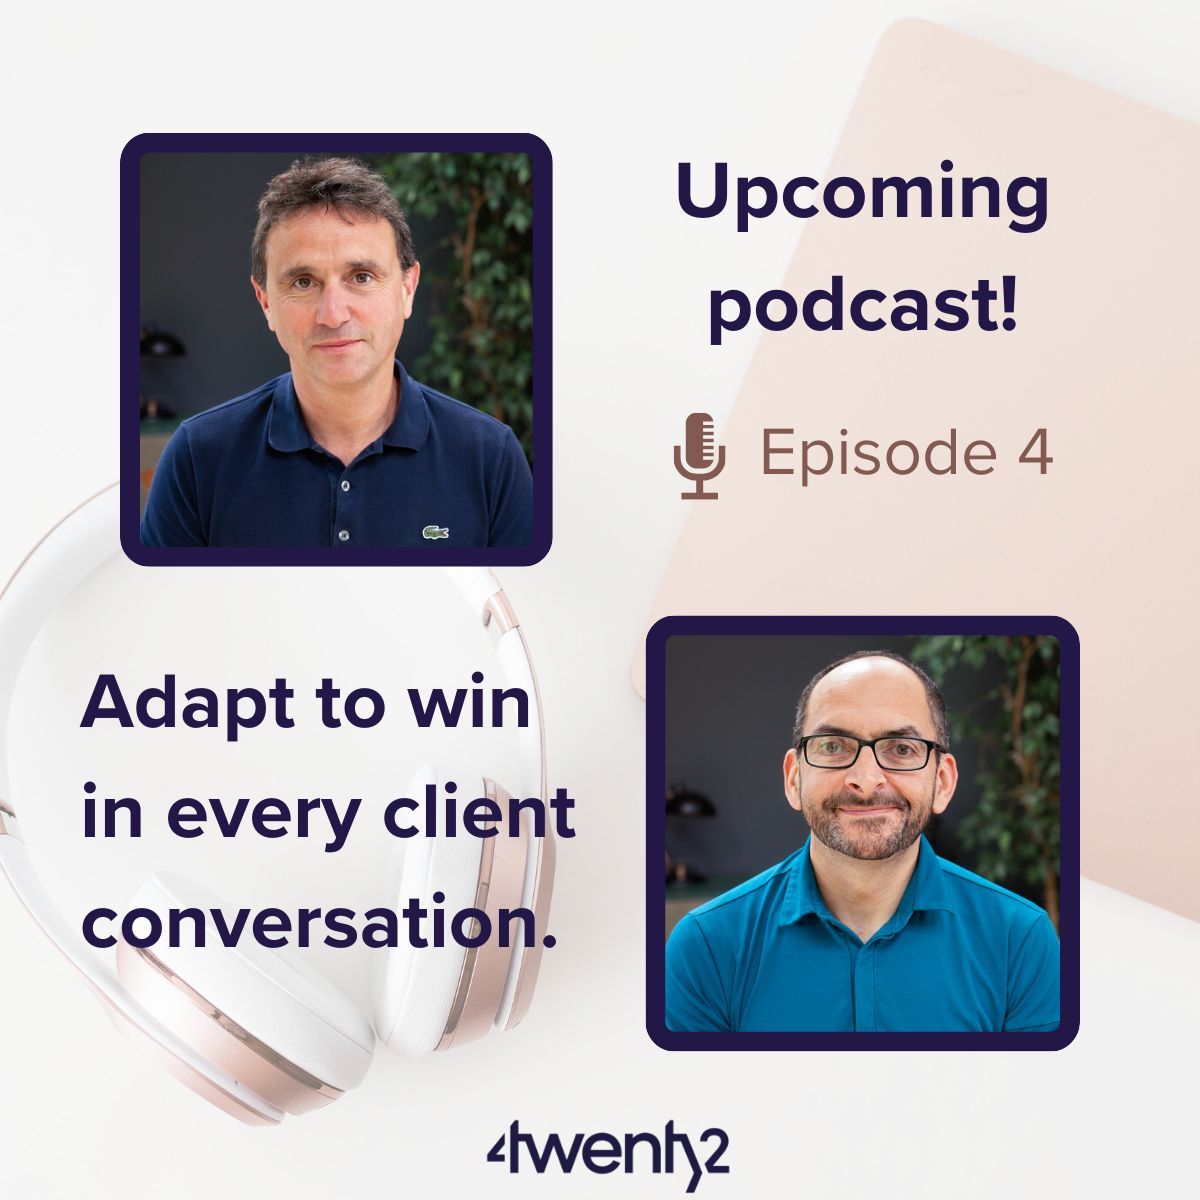 The countdown to #theclientserviceselling podcast episode 4 has begun.

Watch this space for more… #begrowth #clientcentric